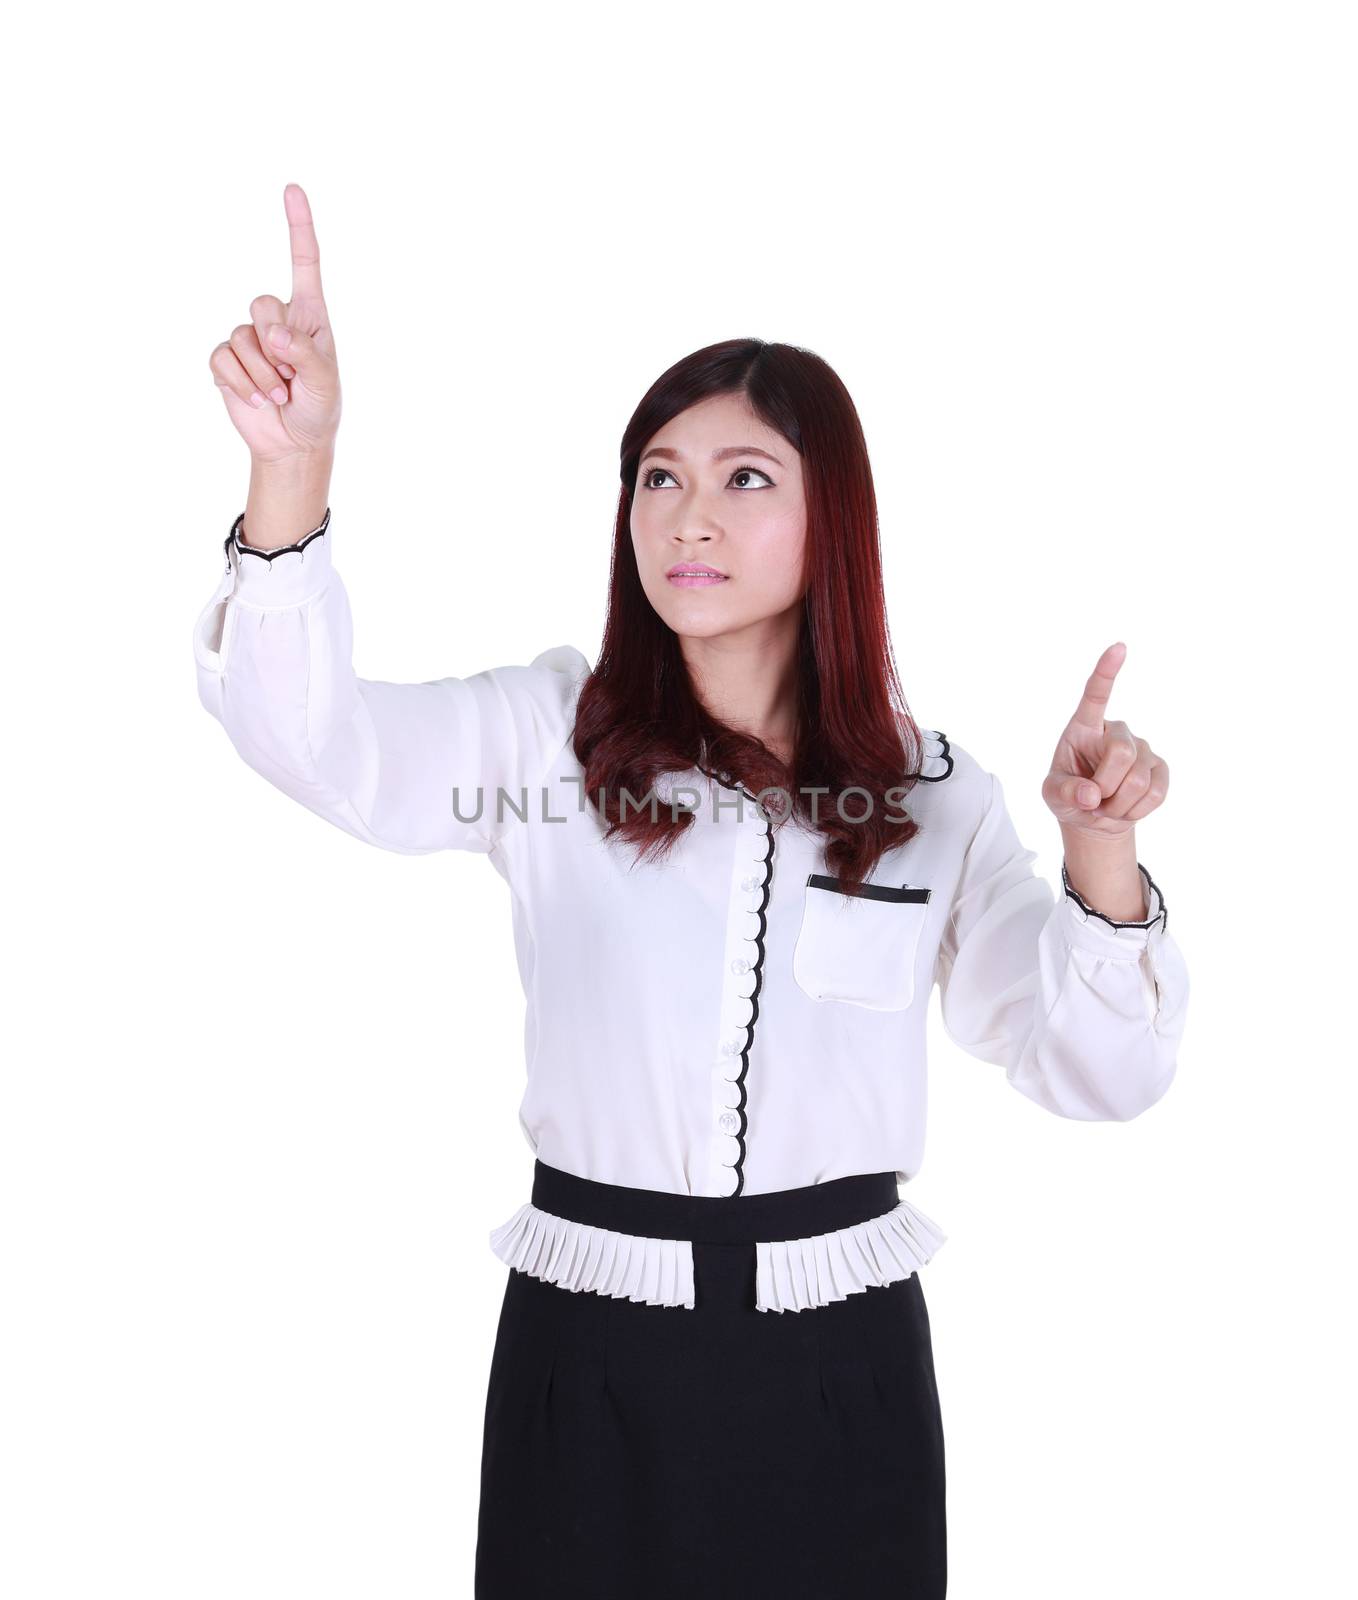 business woman pressing button or something on white background